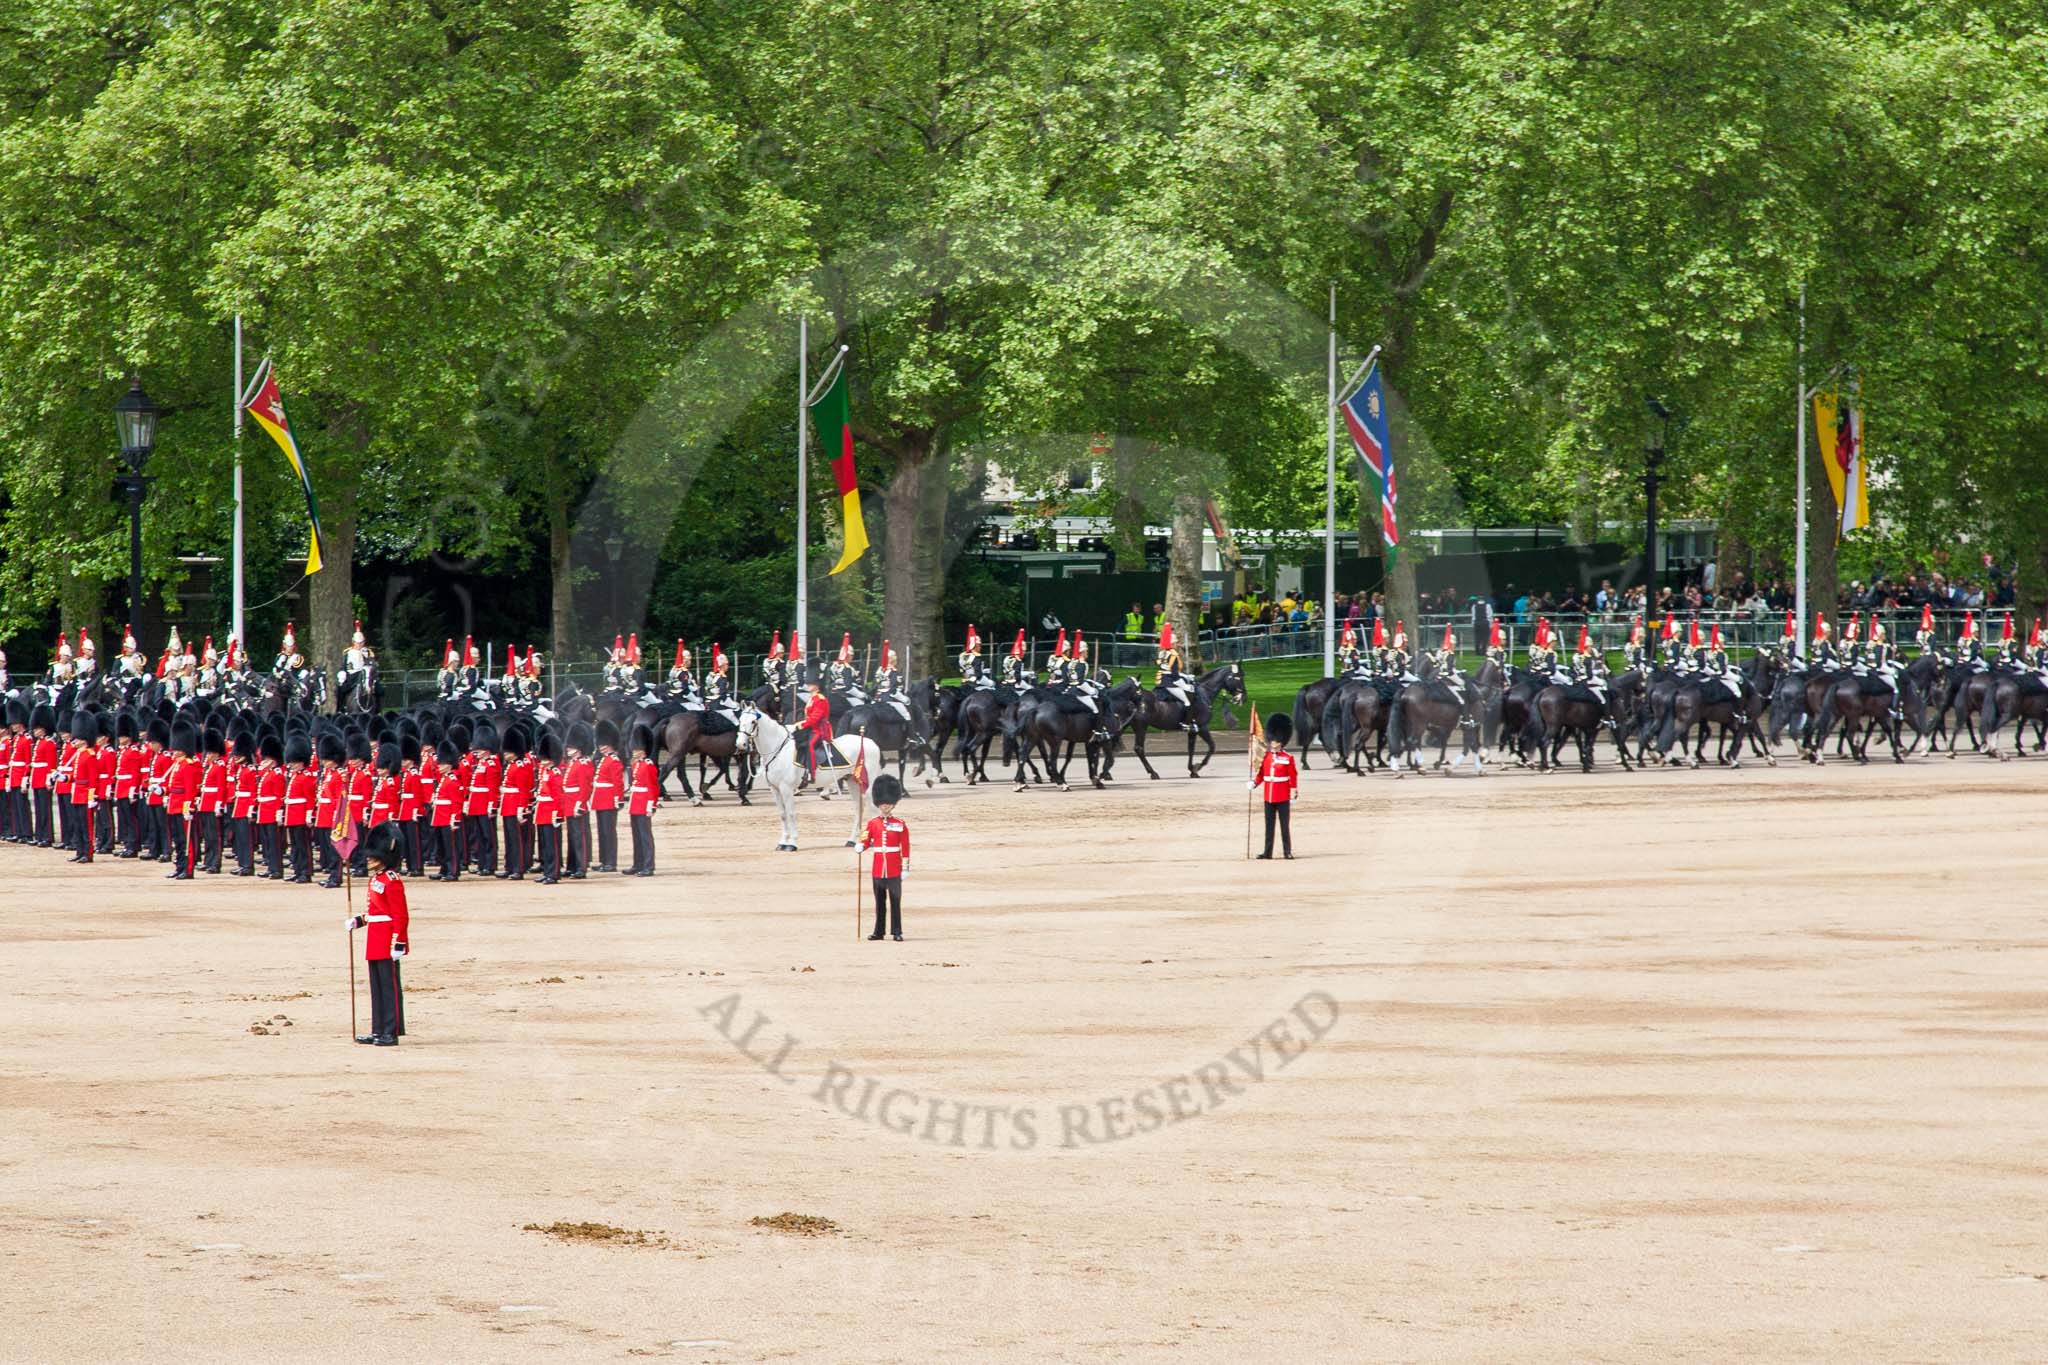 Major General's Review 2013: The Household Cavalry is marching off, led by the Field Officer of the Escort, Major Nick Stewart, The Life Guards, followed by the Trumpeter, Standard Bearer, Standard Coverer. and The Life Guards as first and second divisions of the Sovereign's Escort..
Horse Guards Parade, Westminster,
London SW1,

United Kingdom,
on 01 June 2013 at 12:04, image #693